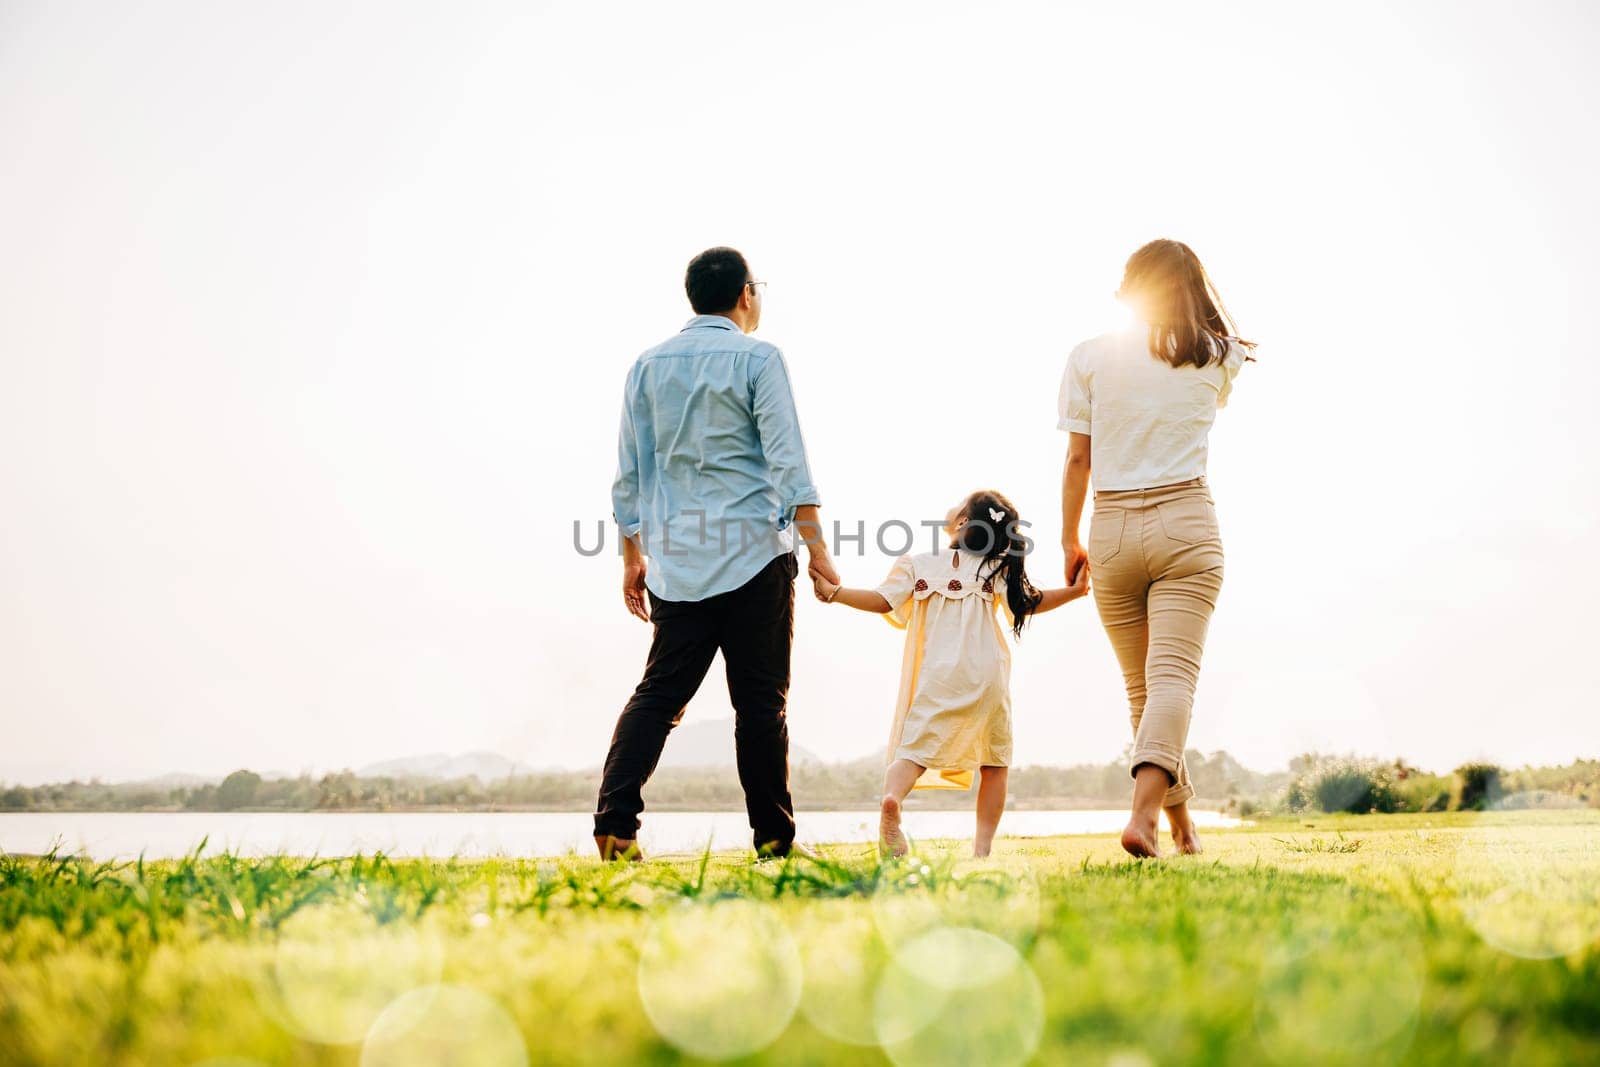 Happy Japanese family walking together in a scenic garden, with a beautiful nature backdrop and the sun shining, enjoying quality time outdoors, Family care, back view